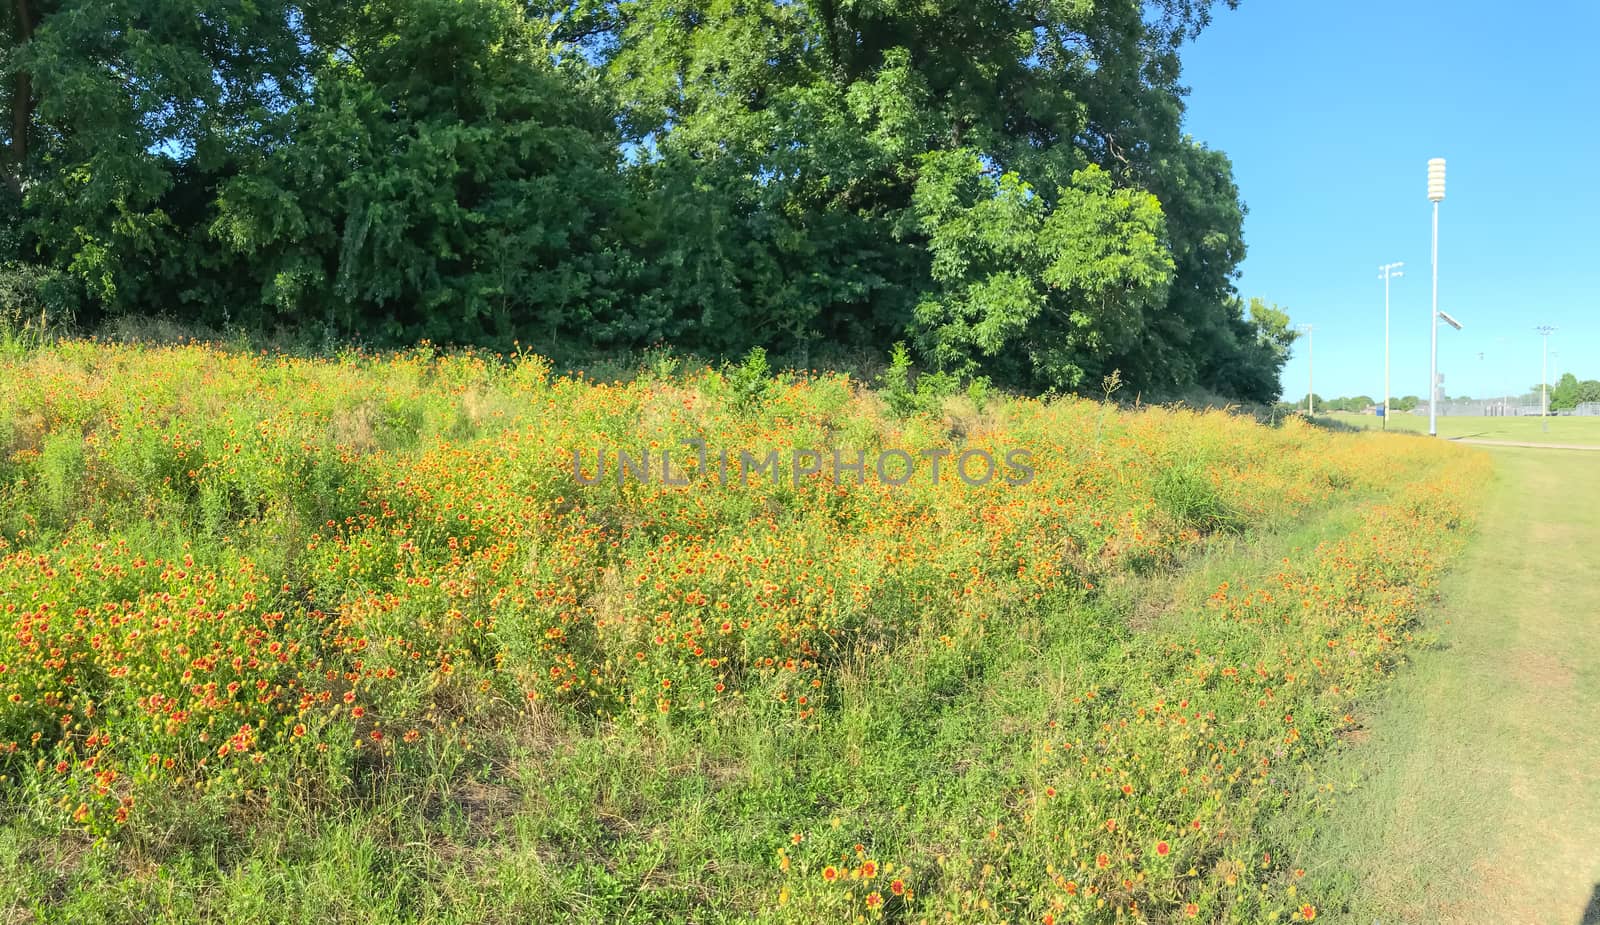 Suburban park with natural trail and blossom field of Indian Blanket wildflower in Coppell, Texas, USA. Gaillardia pulchella North American species of short-lived flowering plants in sunflower family